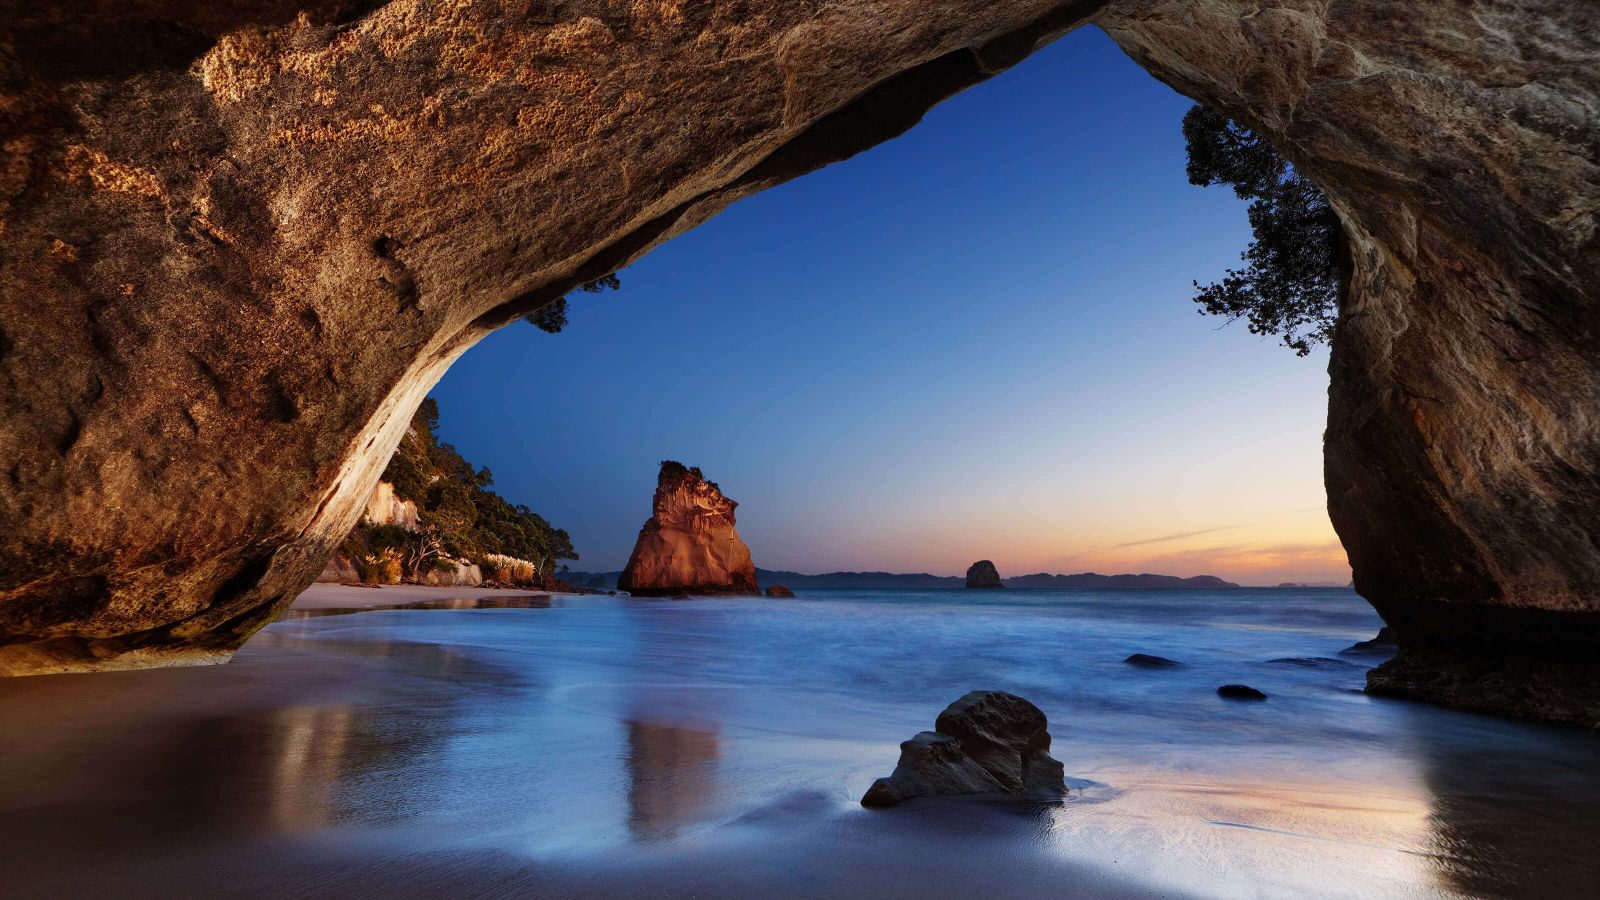 The tide recedes in a twilit seascape framed by the imposing rocky entrance of a huge, seaside cave.